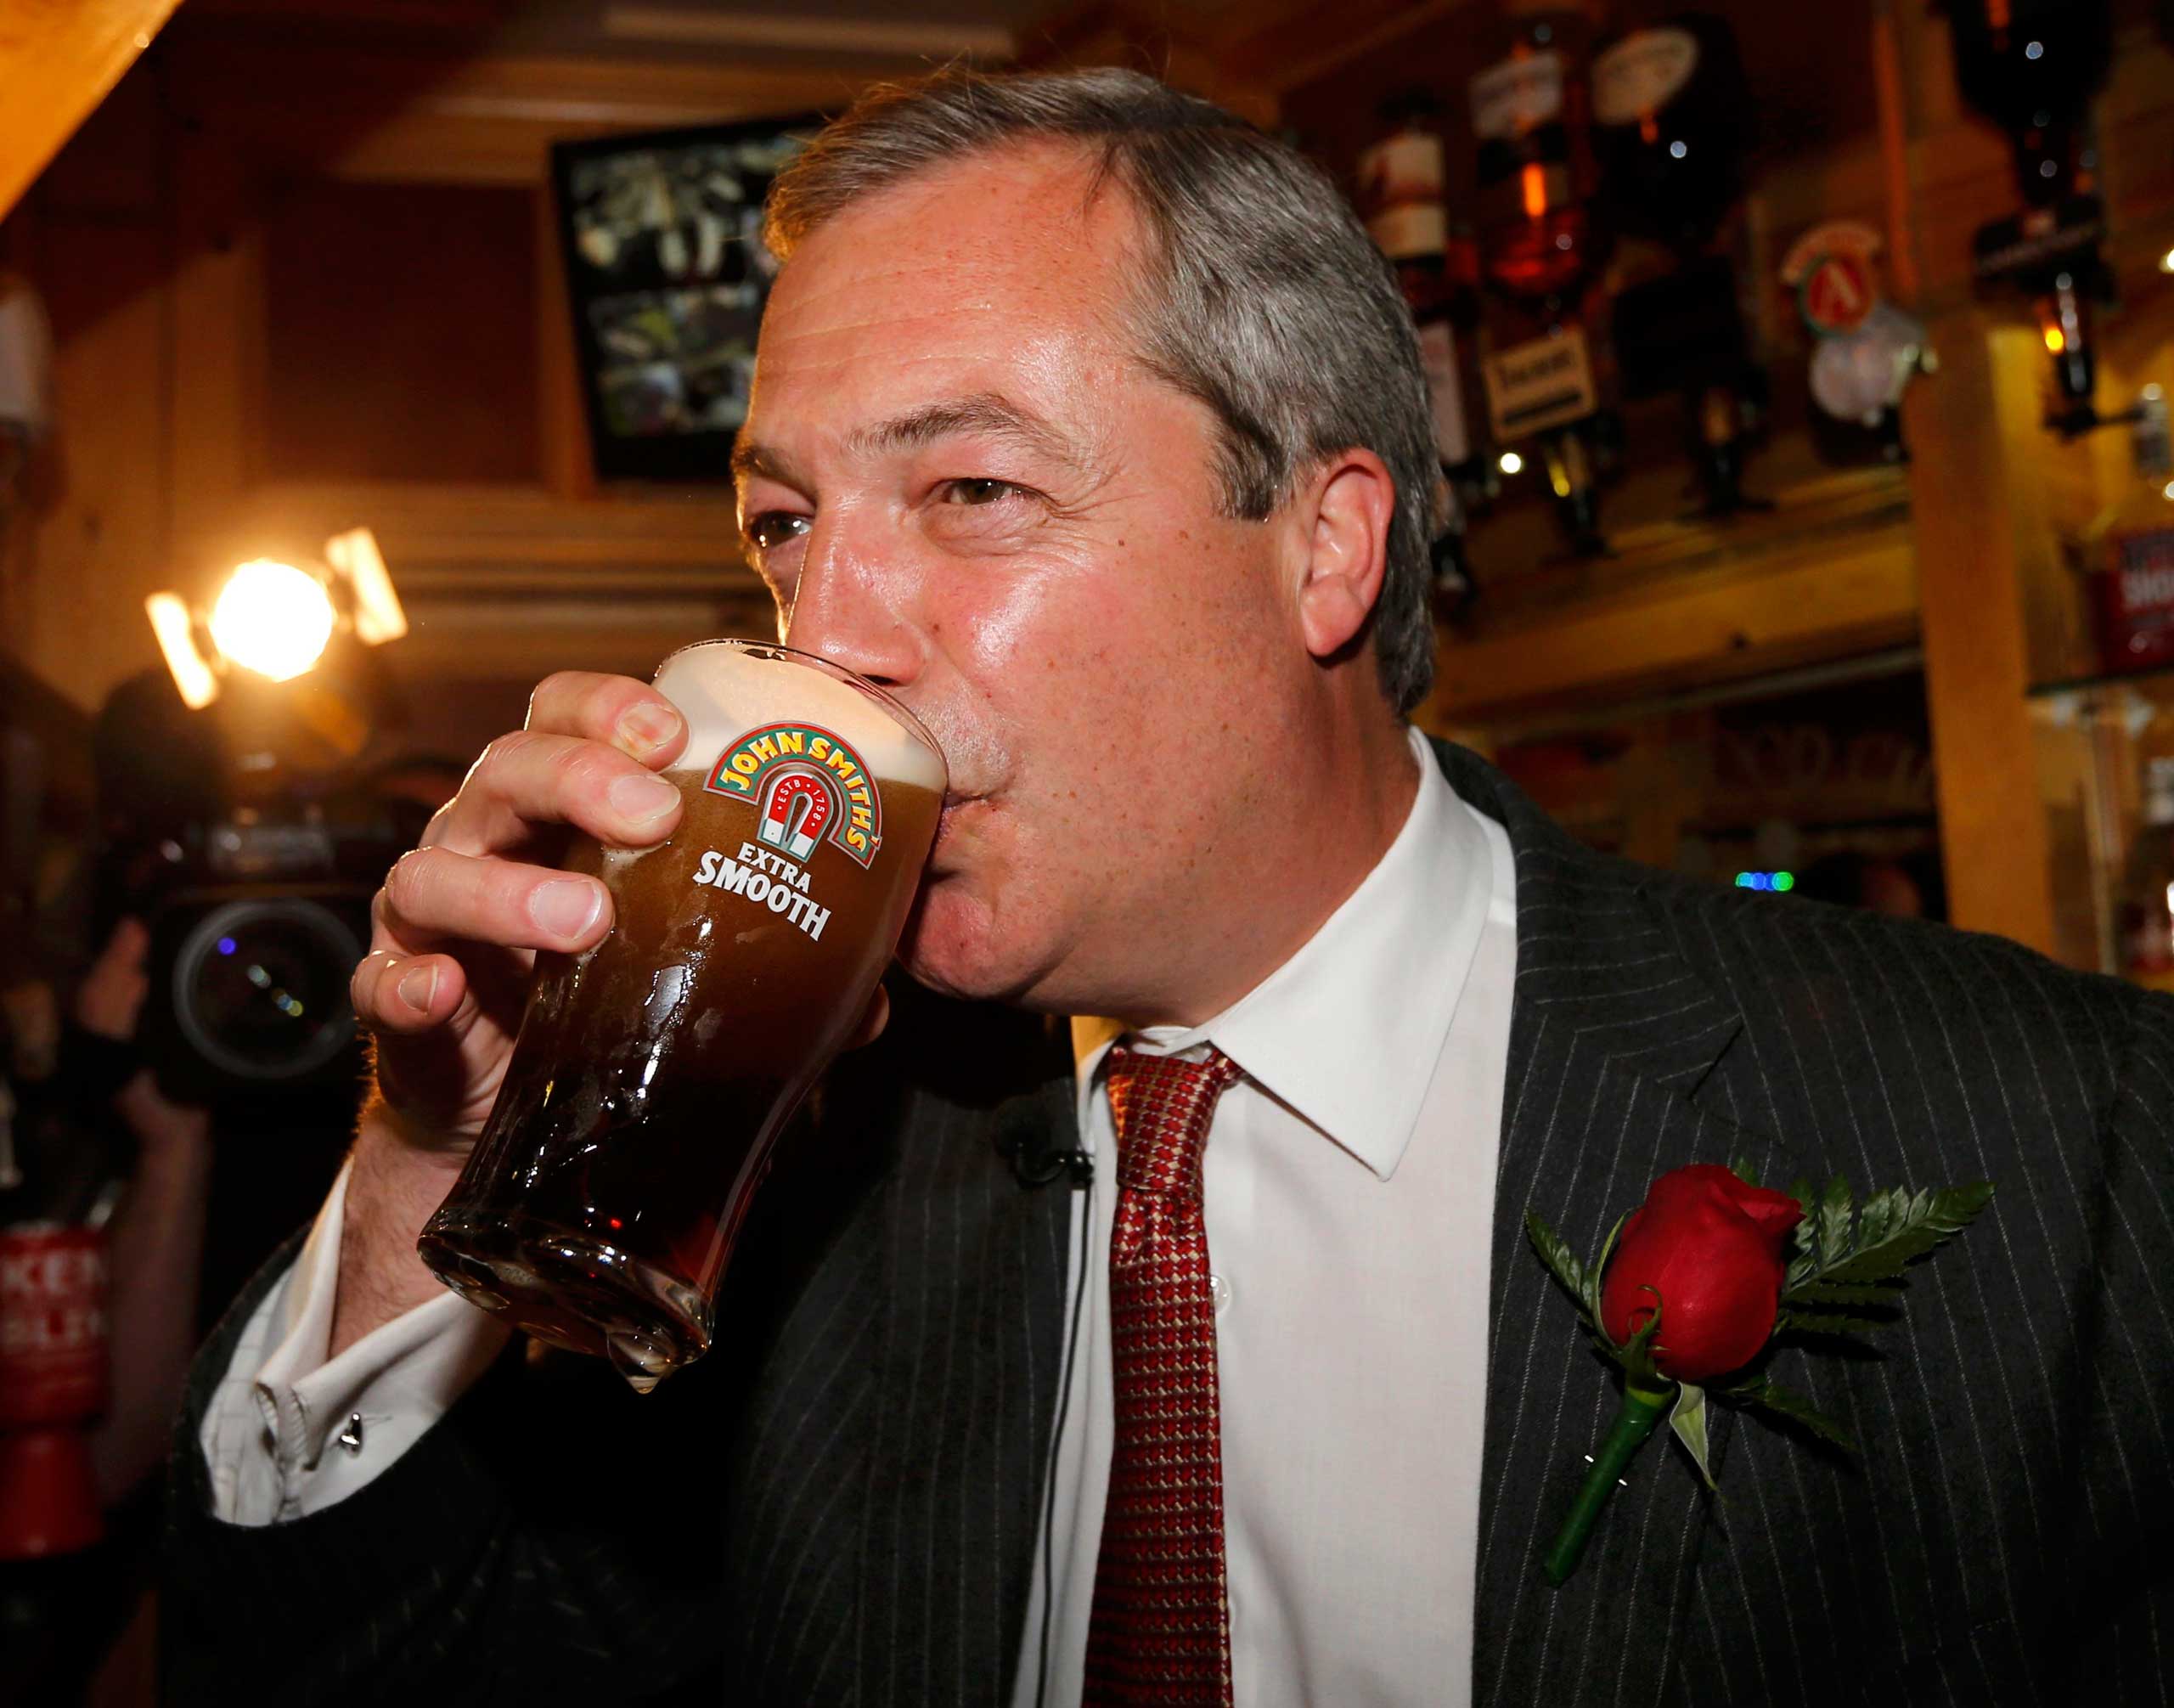 Nigel Farage enjoys a pint of beer during a visit to mark St George's day at the Northwood Club in Ramsgate, southern England on April 23, 2015. (Suzanne Plunkett—Reuters)